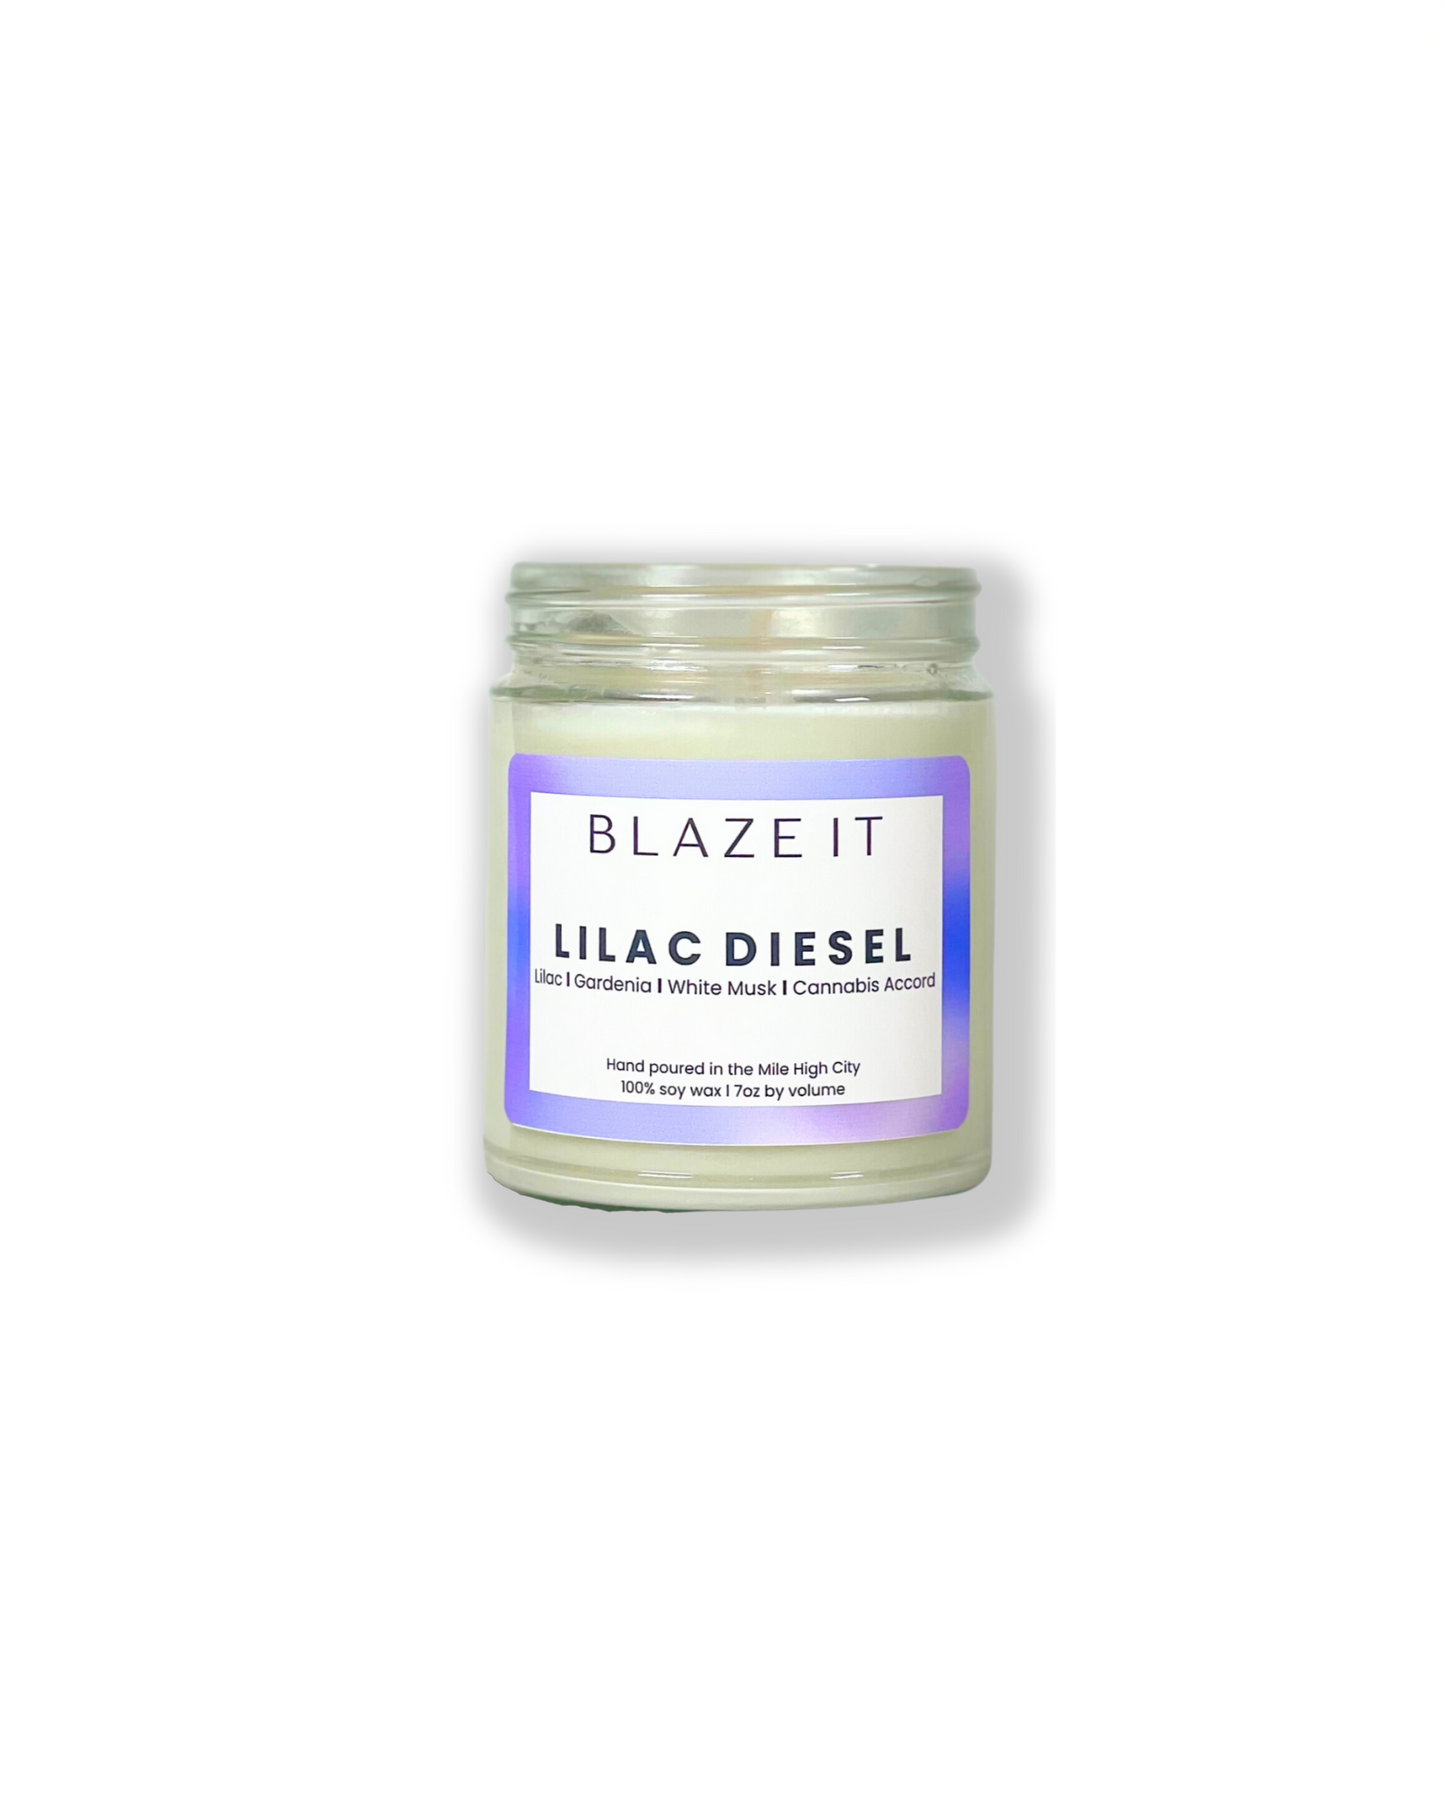 Lilac Diesel soy candle - Blaze It Candle Co